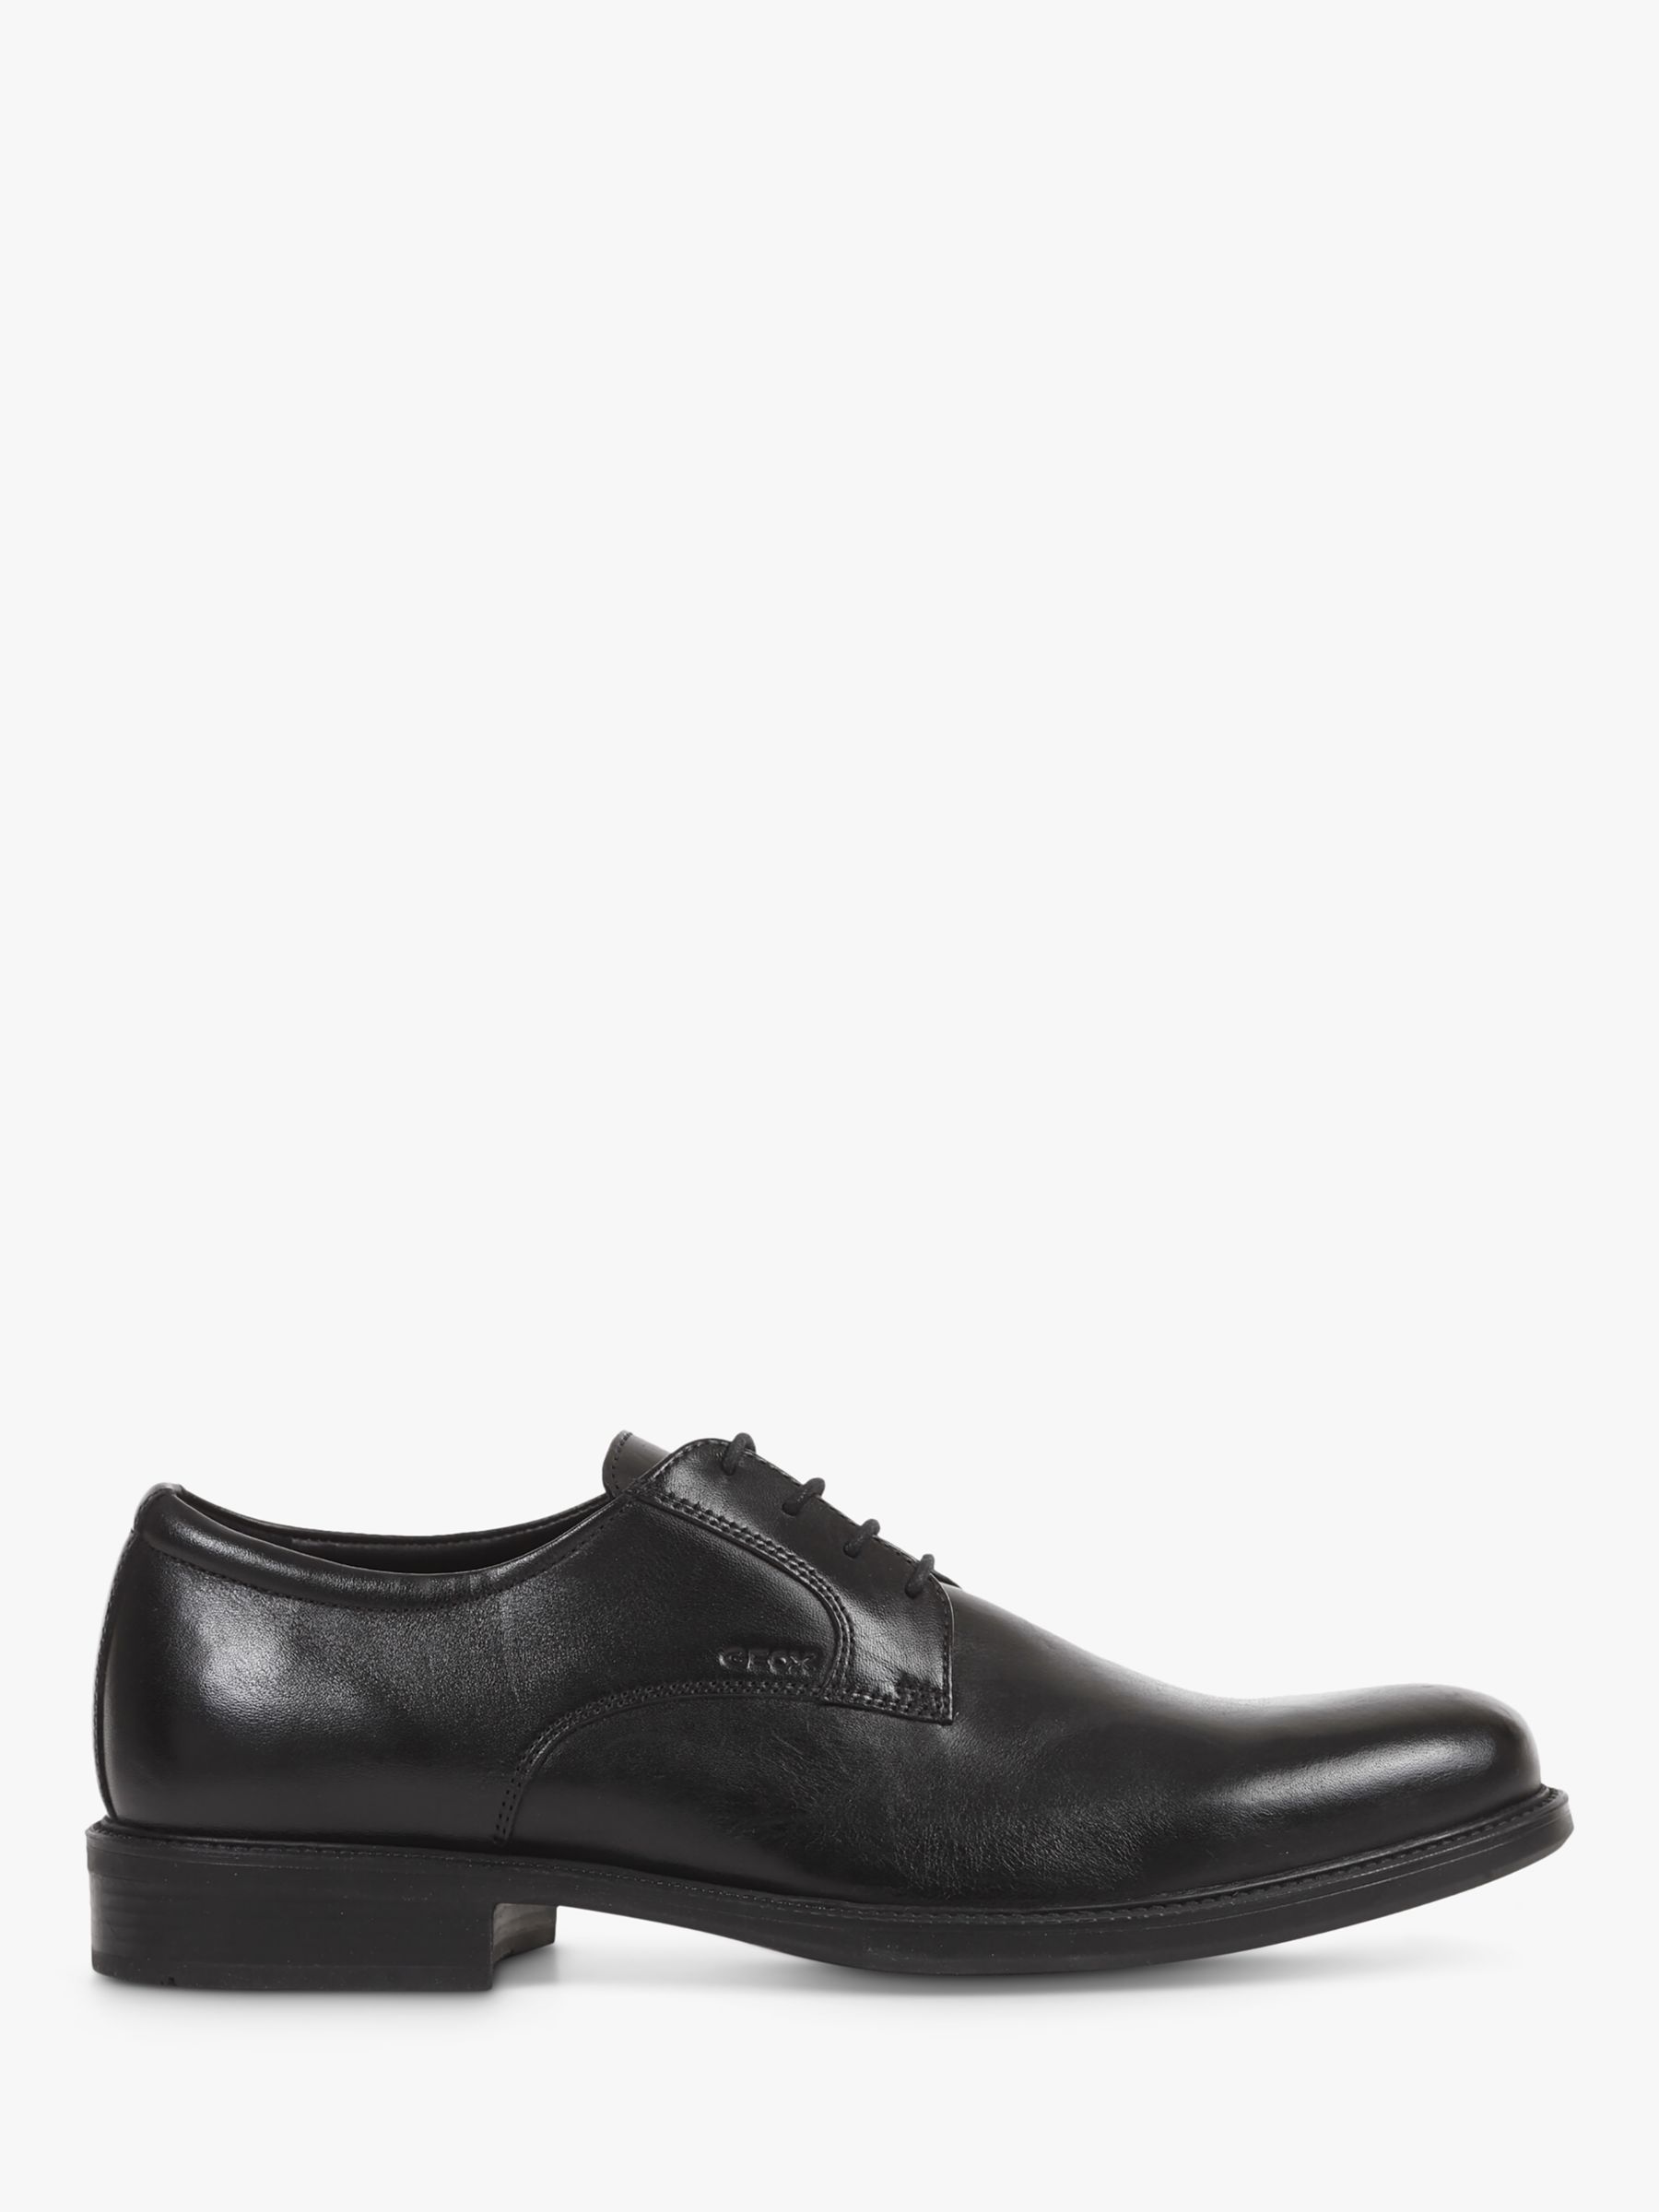 montículo golpear Desventaja Geox Carnaby Leather Lace Up Derby Shoes, Black at John Lewis & Partners